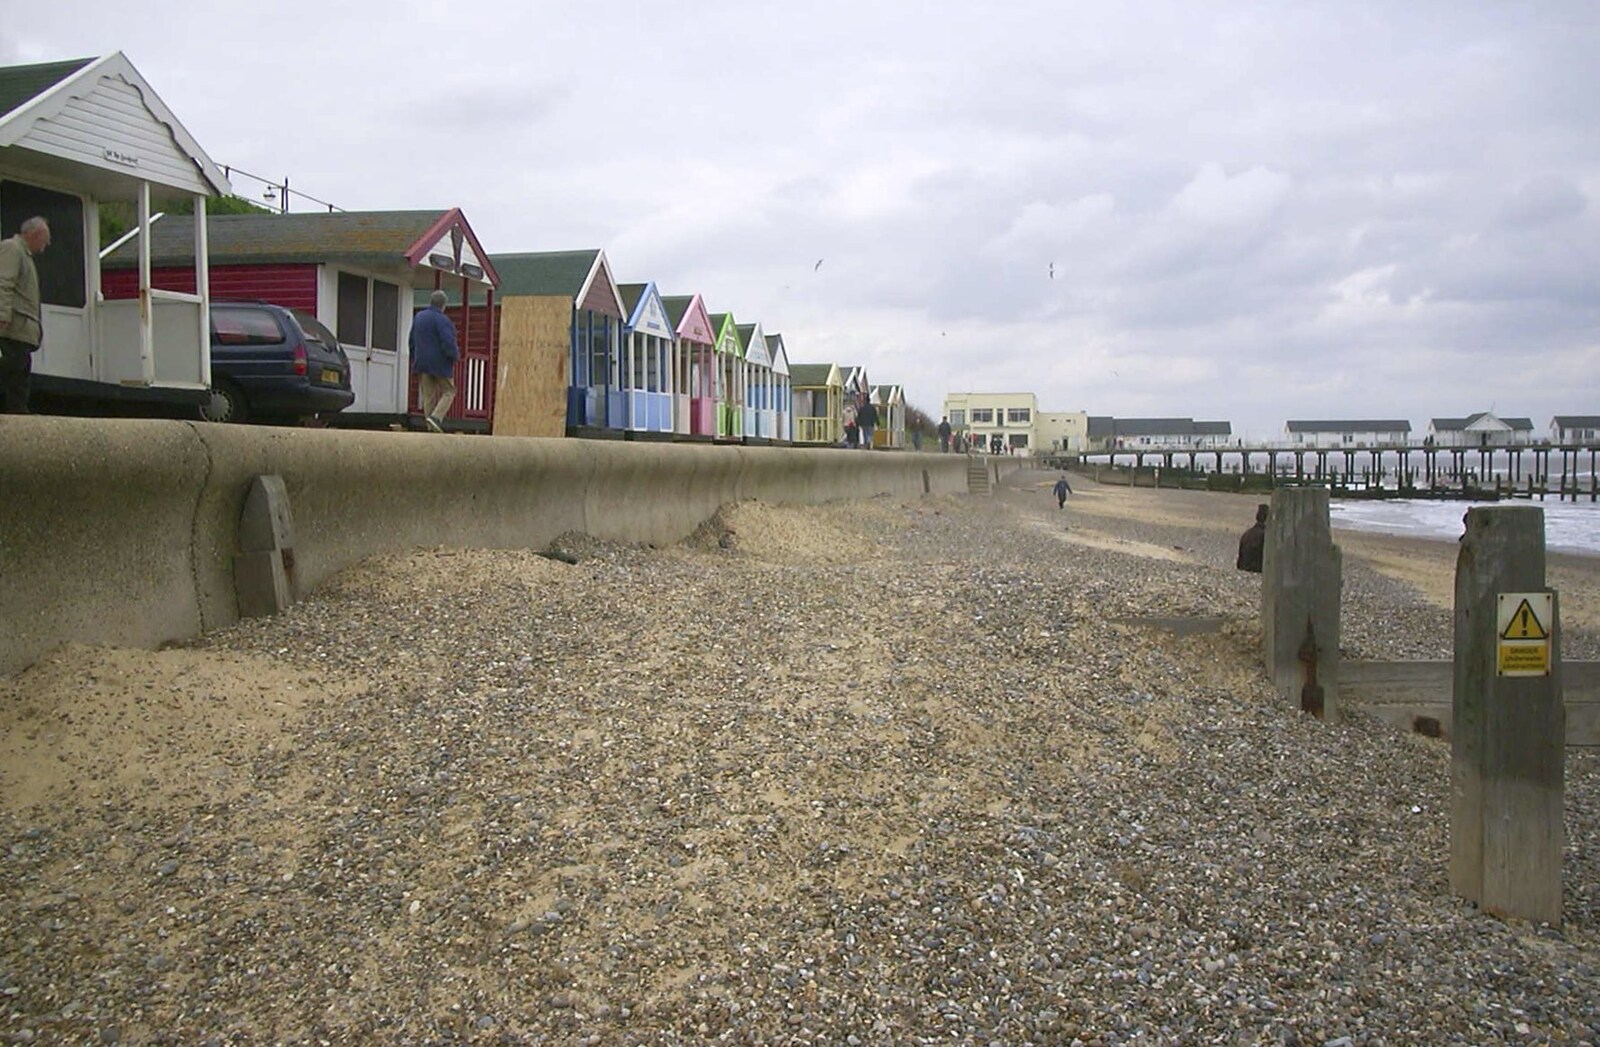 The mostly-empty beach from Moping in Southwold, Suffolk - 3rd April 2004